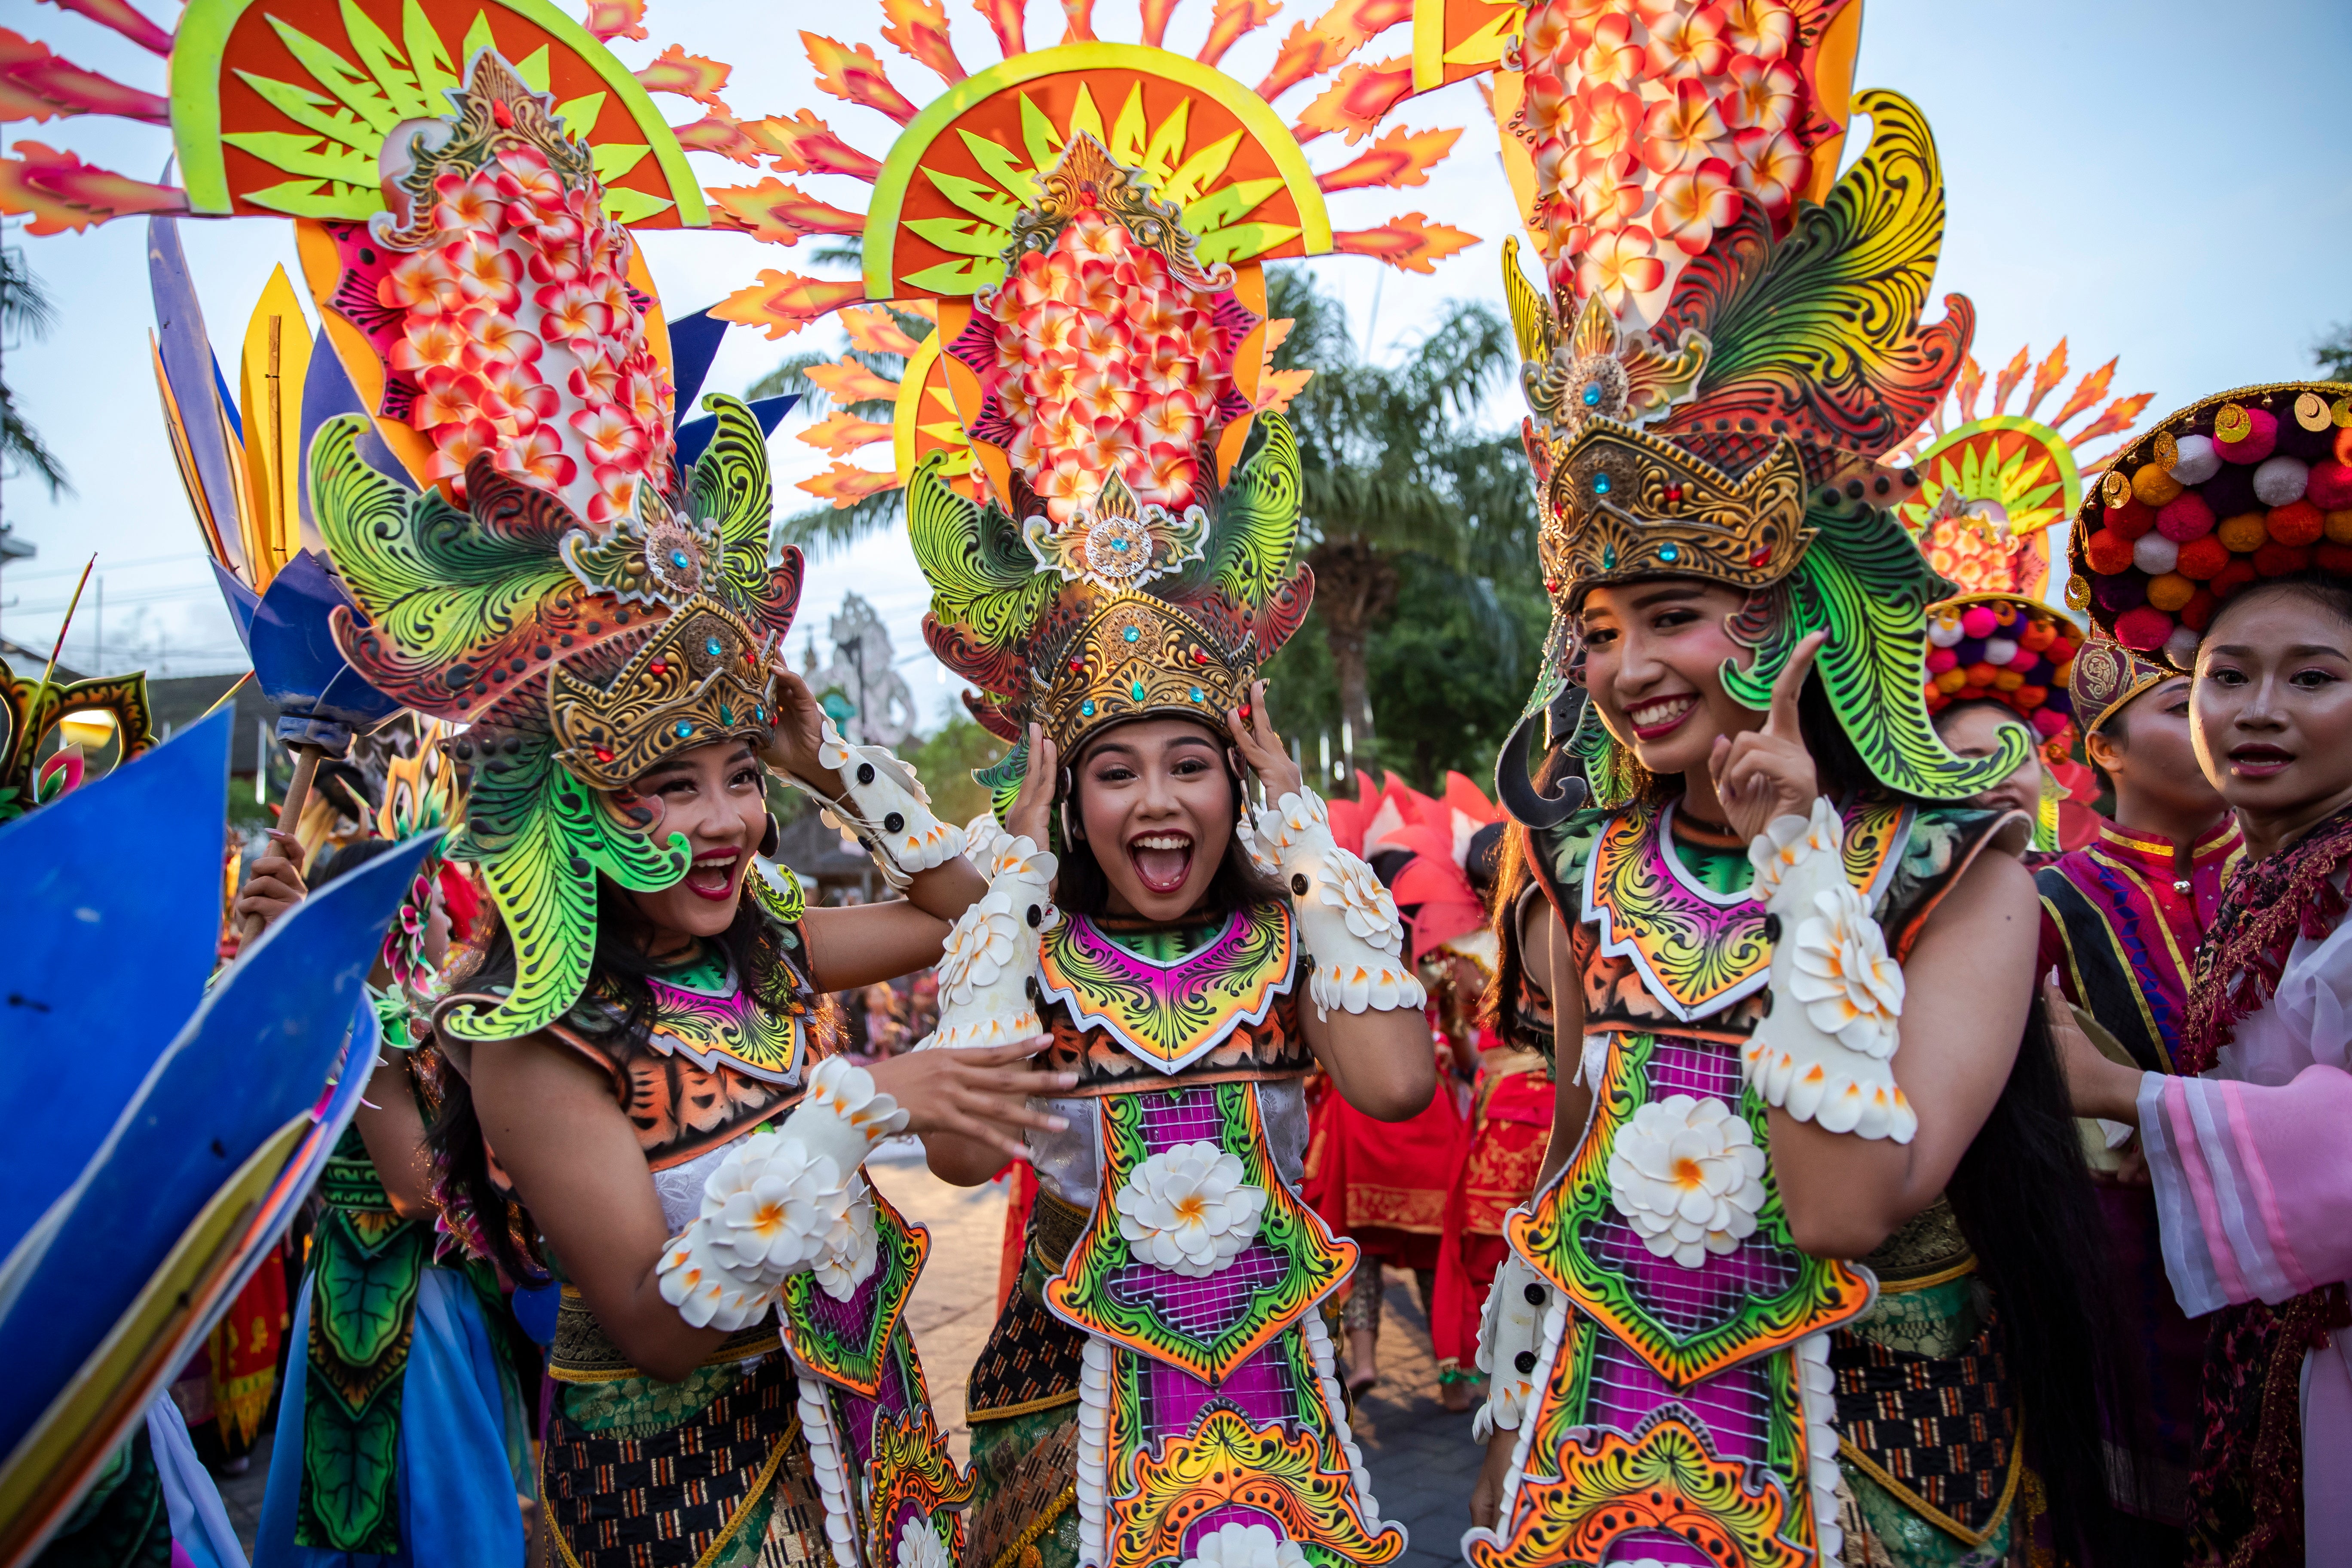 Balinese dancers perform as they take part in a cultural parade, during a new year's eve celebration at a main road in Denpasar, Bali